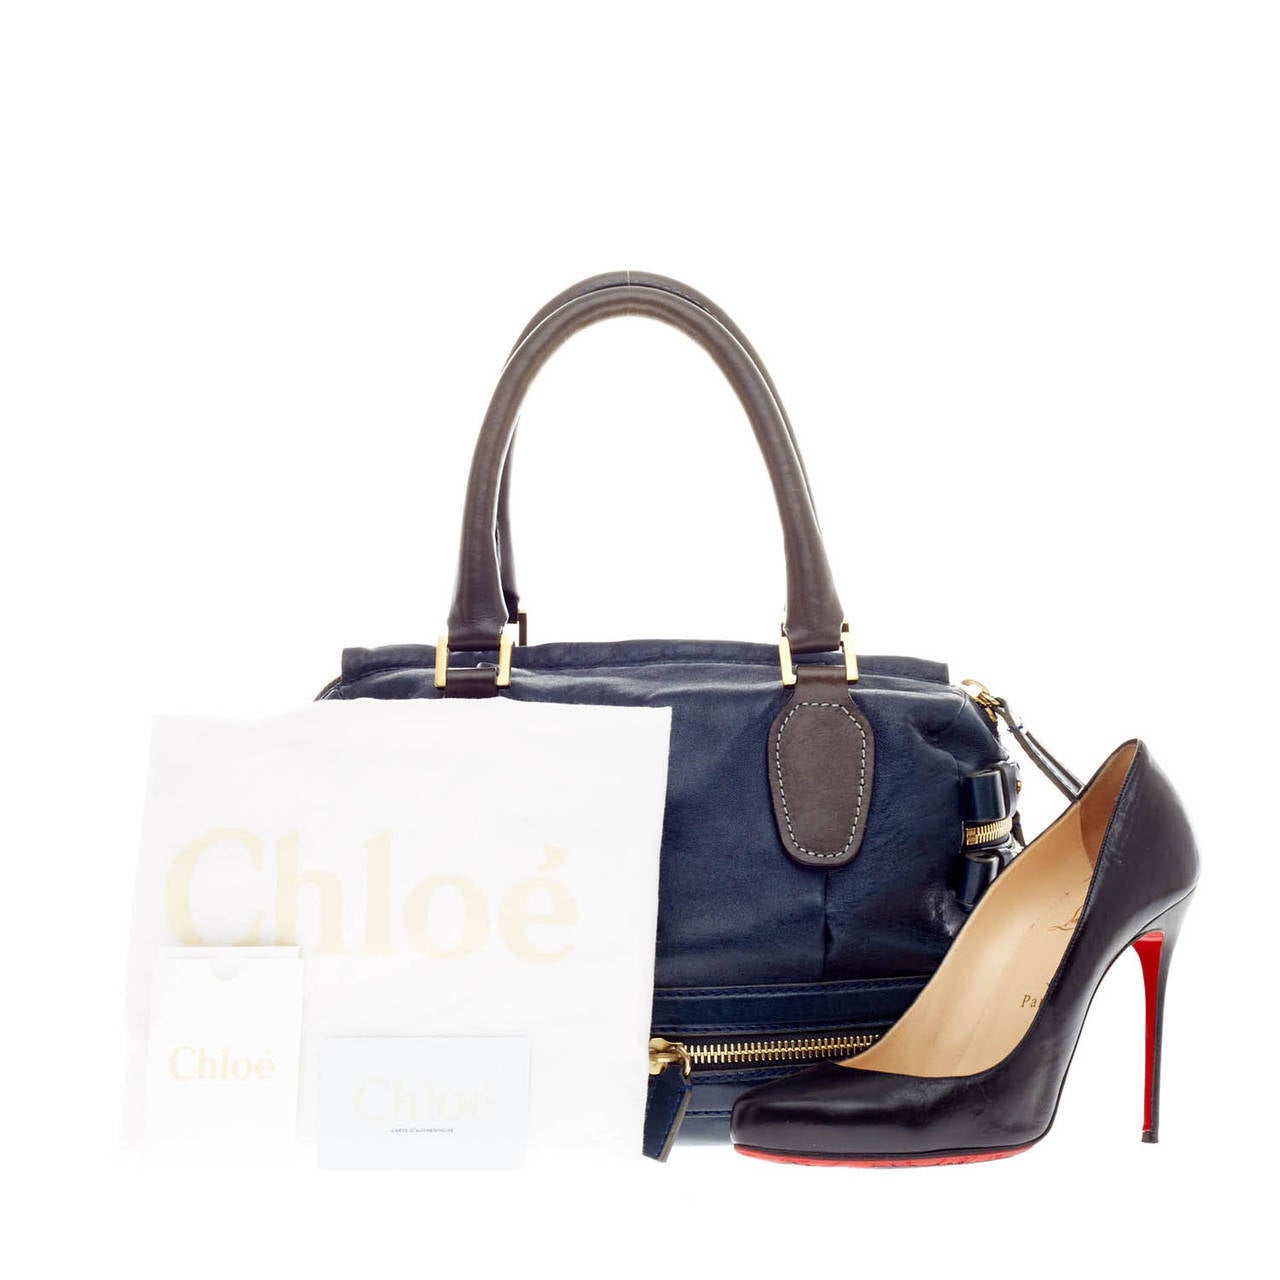 This authentic Chloe Andy Expandable Tote is a uniquely stylish yet practical bag with and expandable base. Crafted from sumptuous brown and deep blue lamb leather, this bag features gold-tone hardware, protective feet studs, dual-rolled handles,